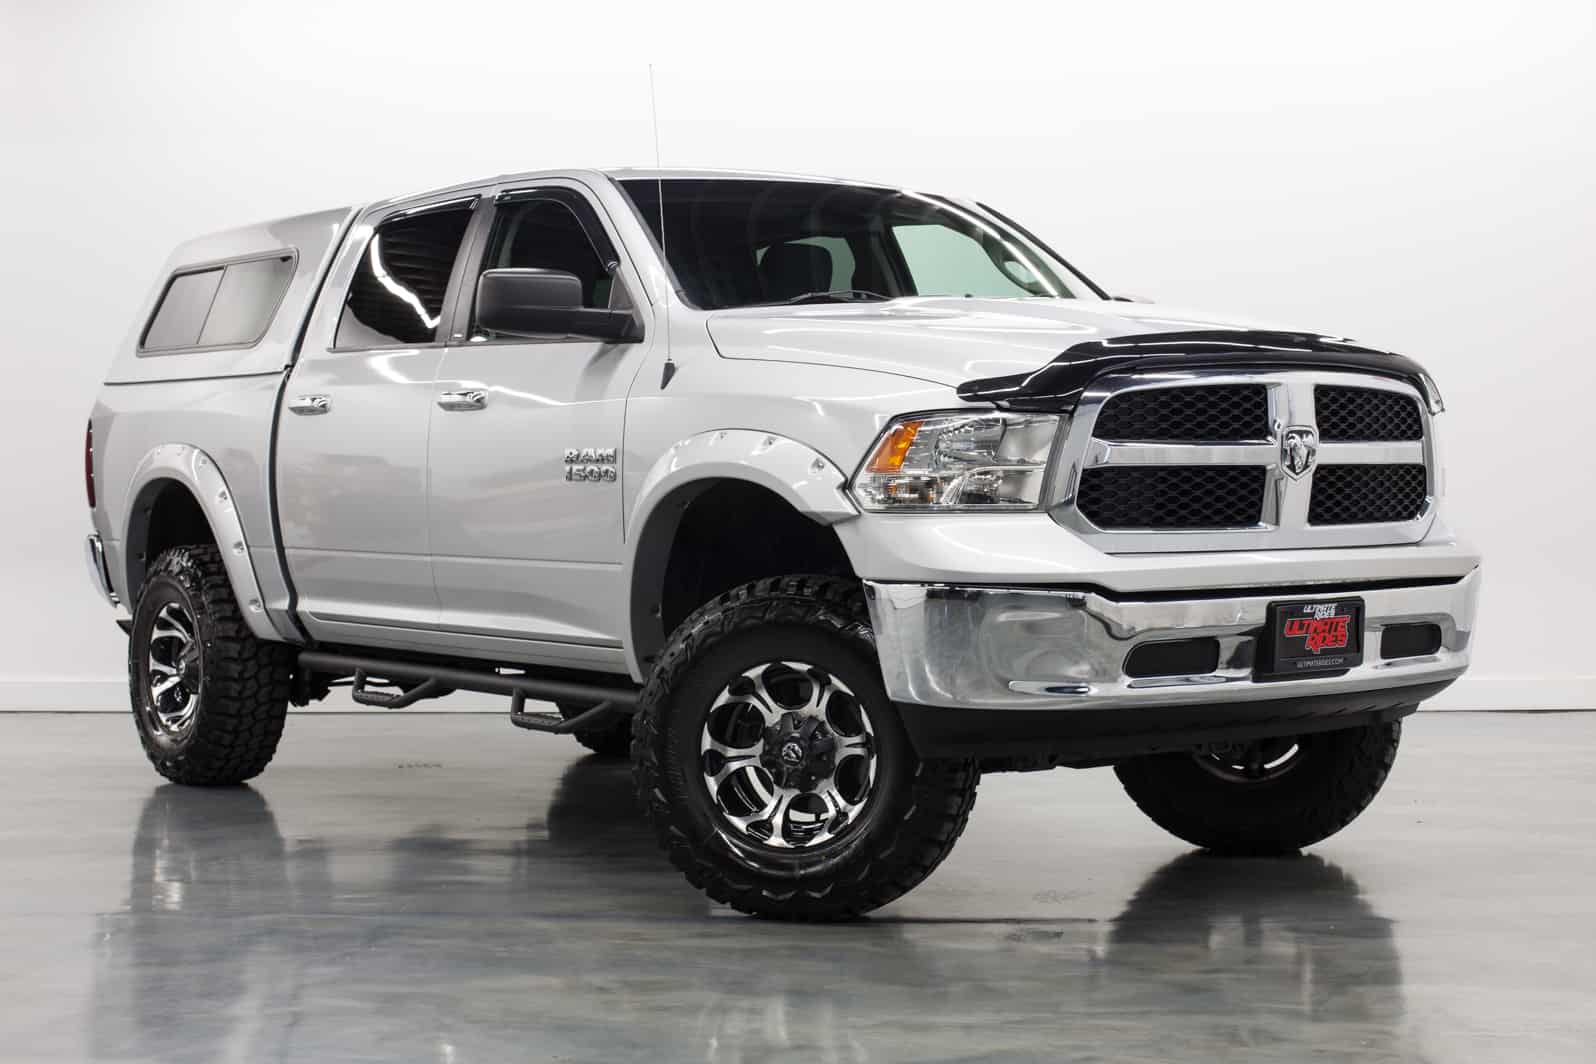 New Lifted Ram Trucks for Sale